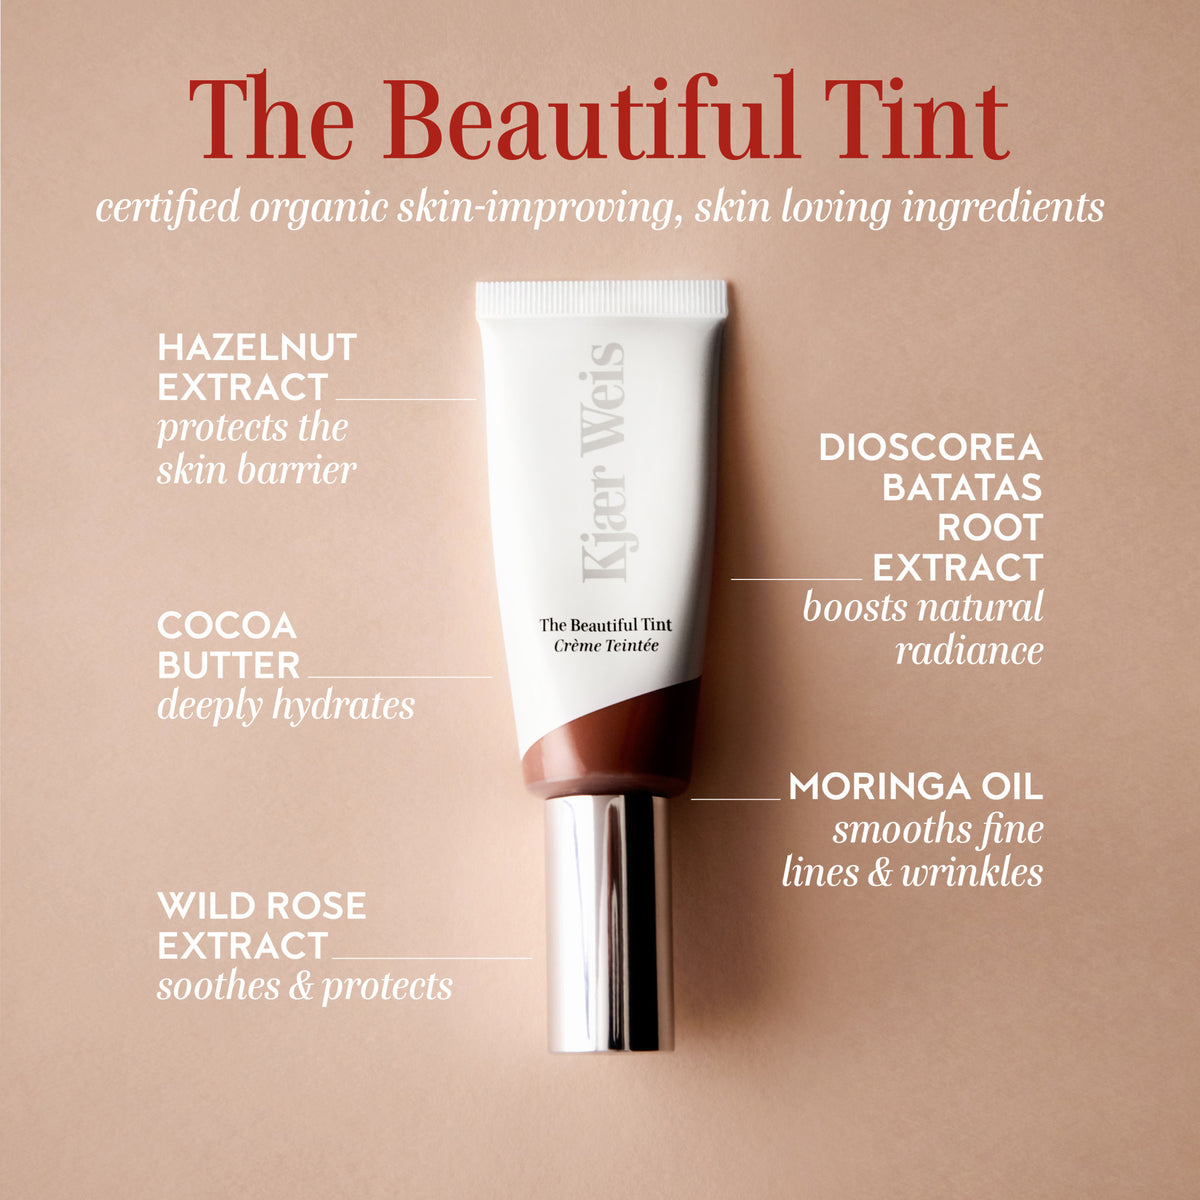 Kjaer Weis The Beautiful Tint . This product is in the color nude, for medium complexions